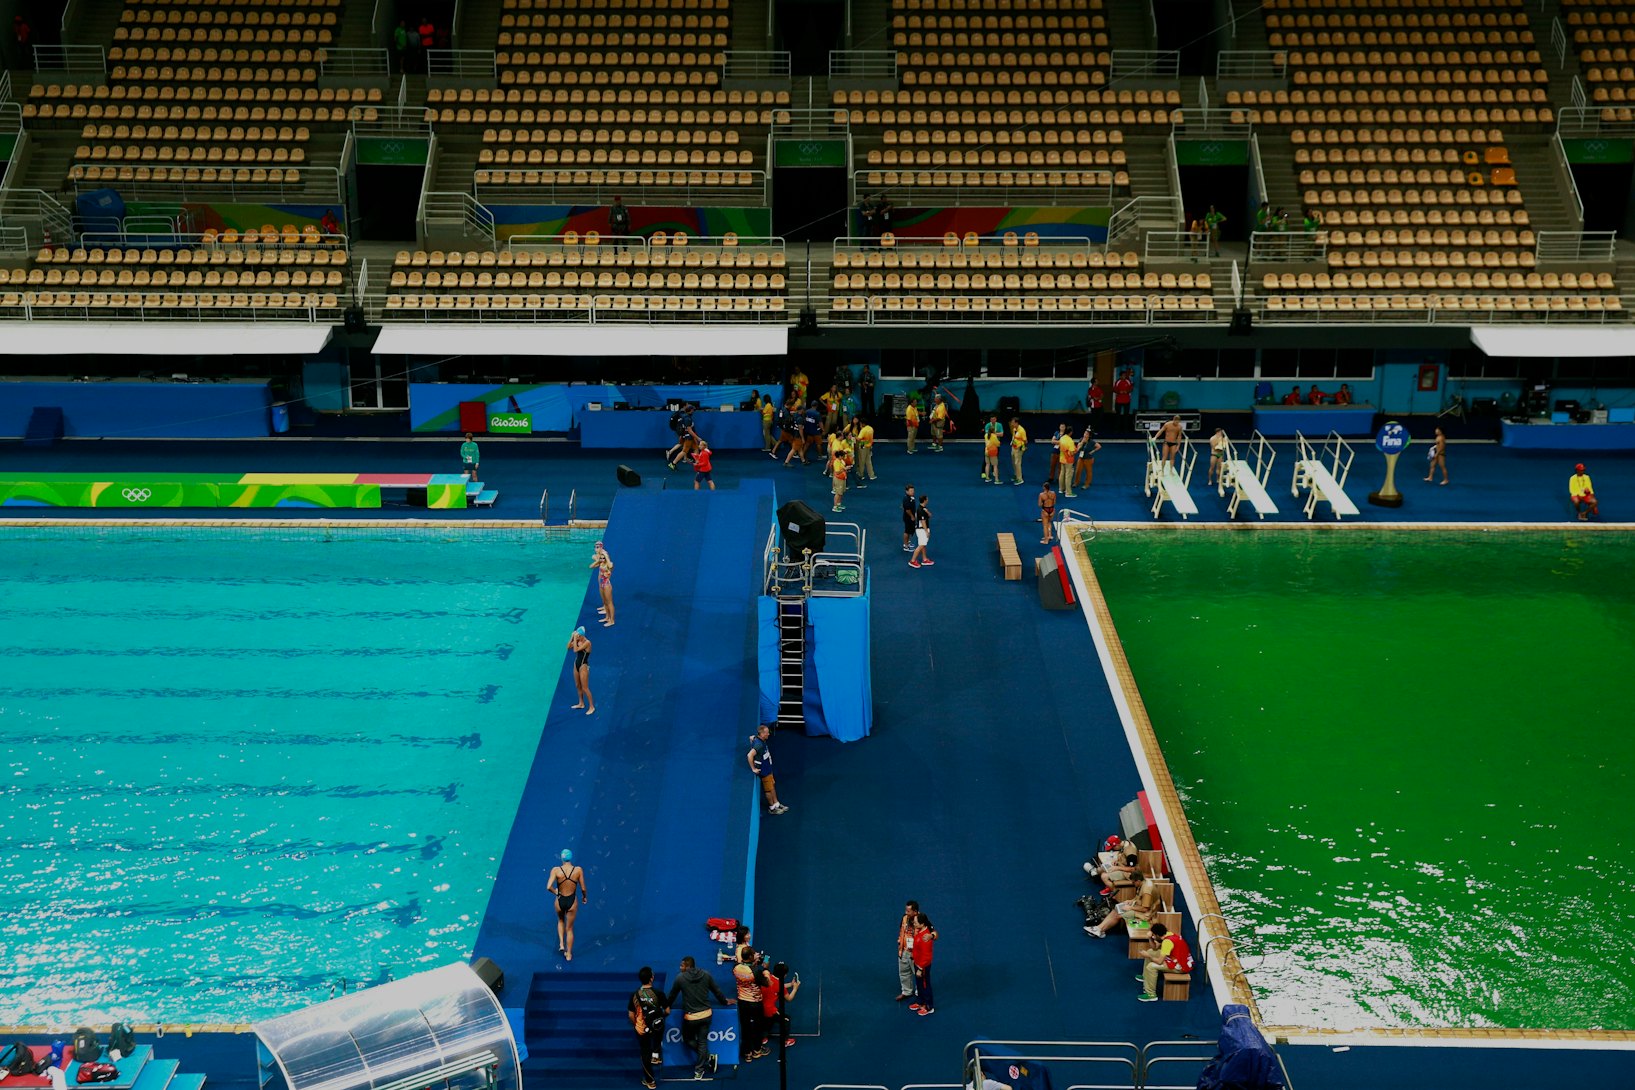 4 Theories Why The Olympic Diving Pool Suddenly Turned Green